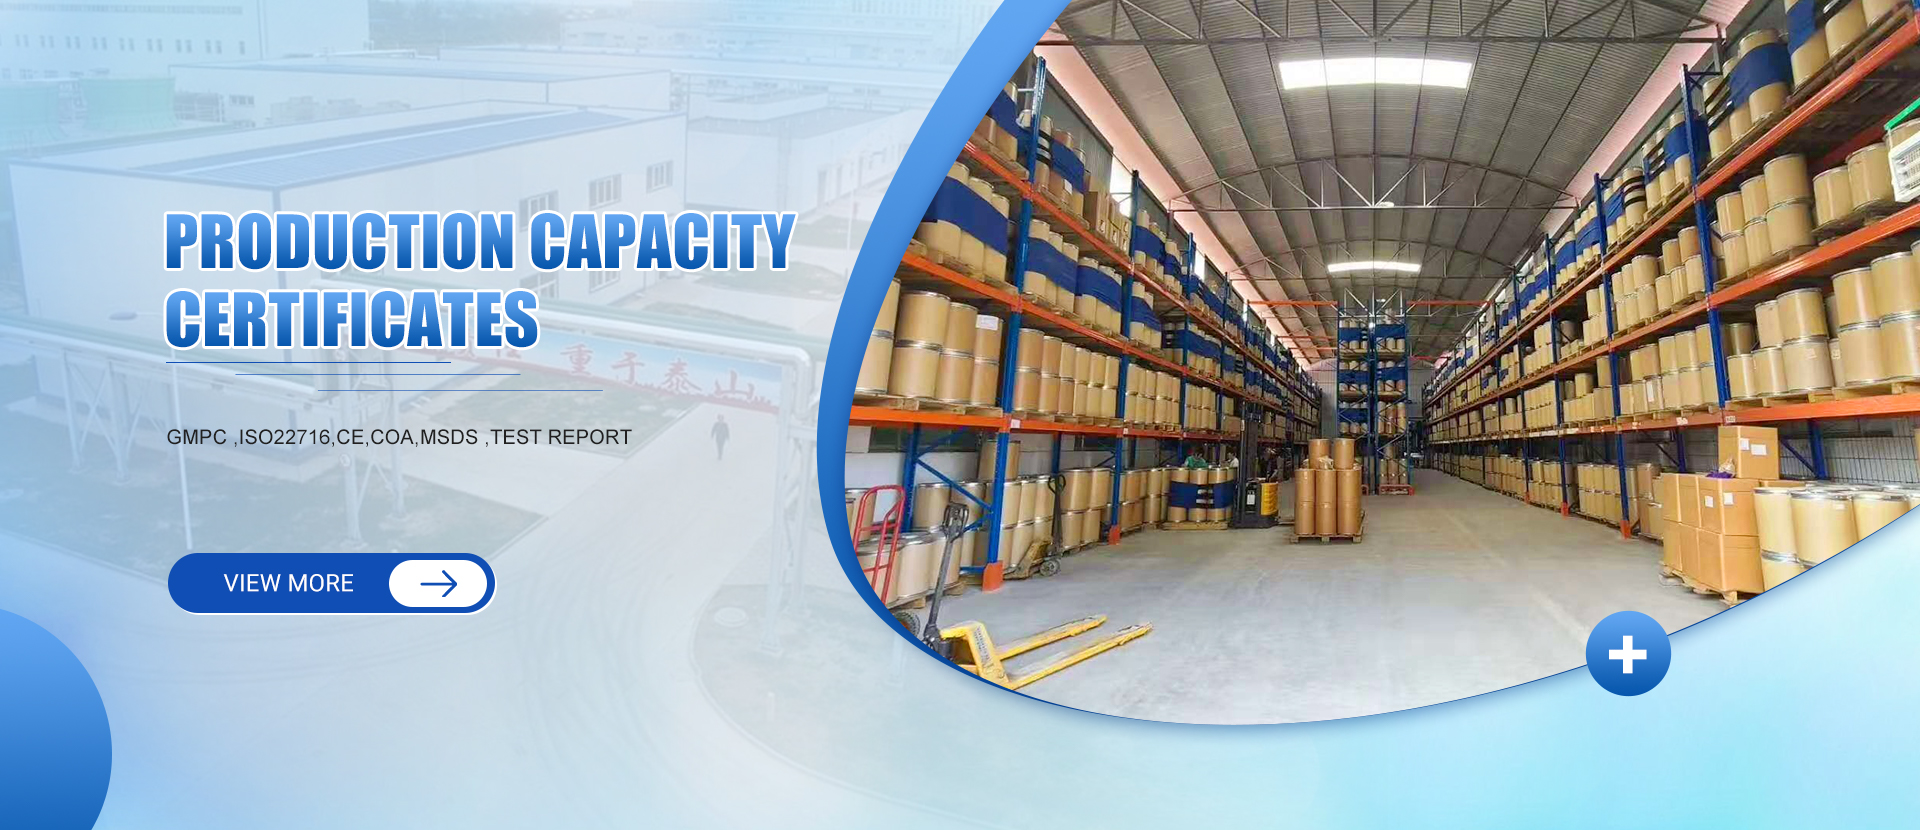 index_banner_production_capacity_certlficates